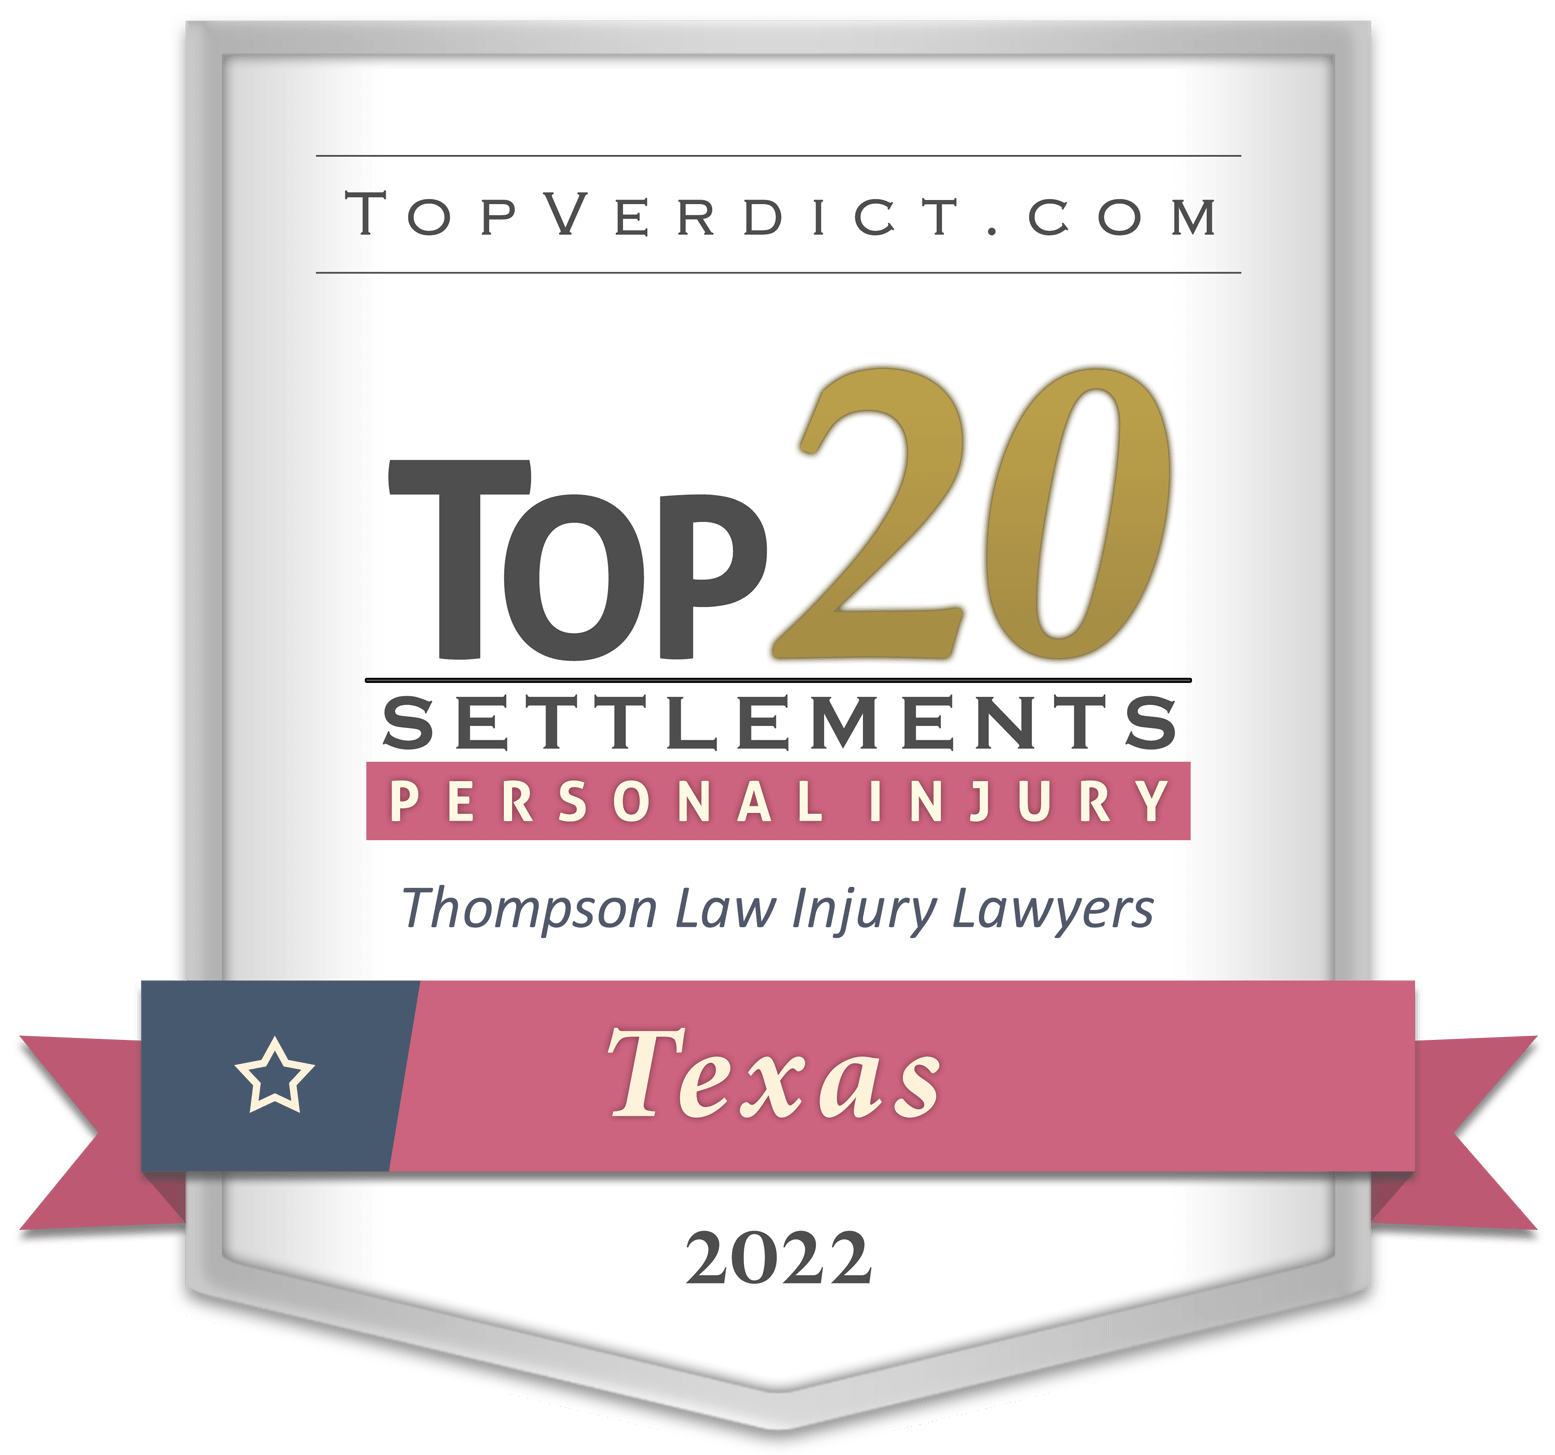 TopVerdict Top 20 personal injury settlements in Texas 2022 badge - Odessa Personal Injury Law Firm